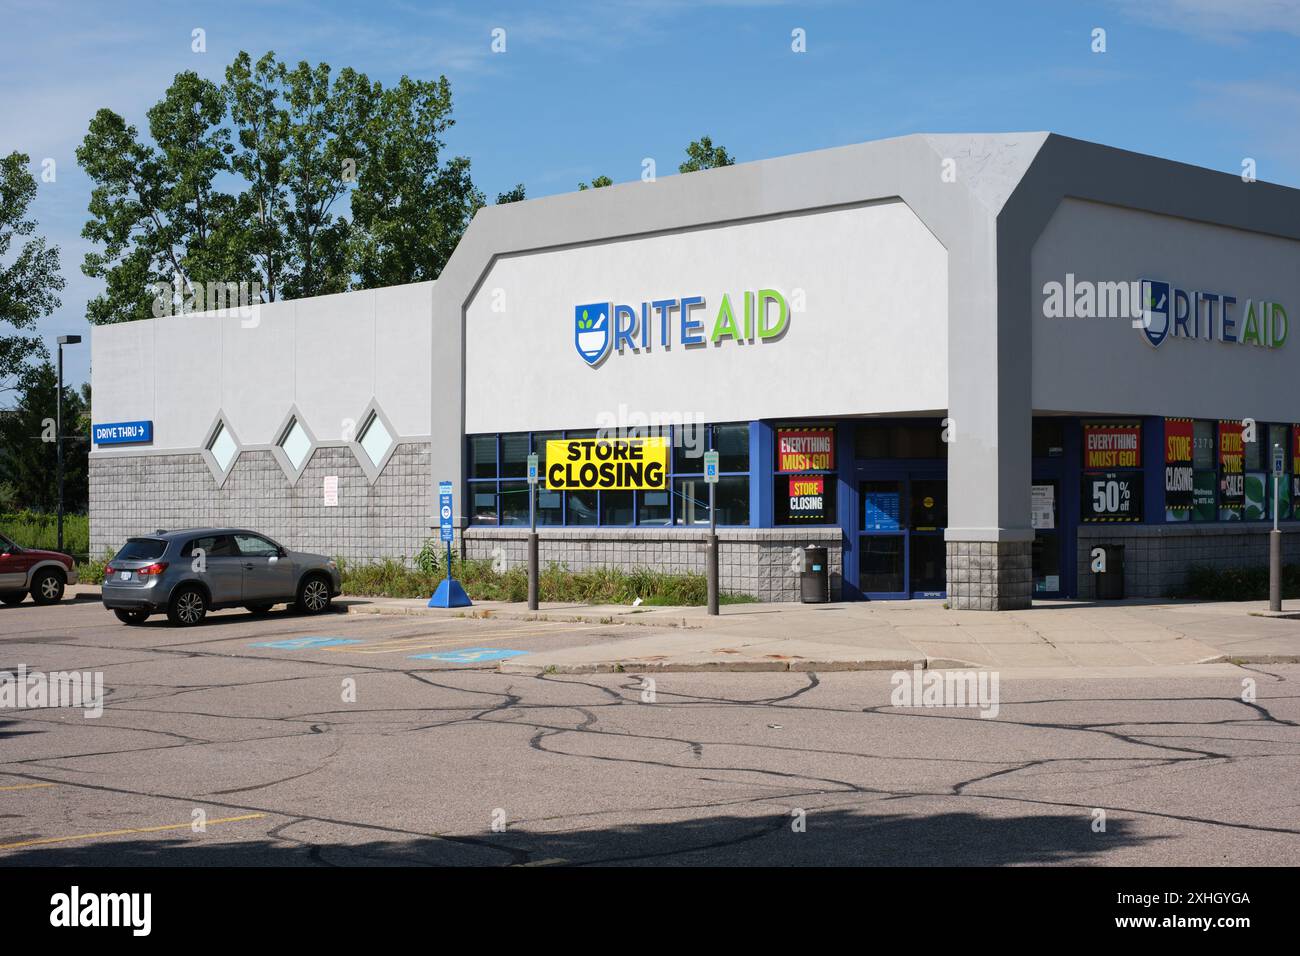 A Rite Aid drugstore with store closing signs, in Grand Blanc Michigan USA Stock Photo